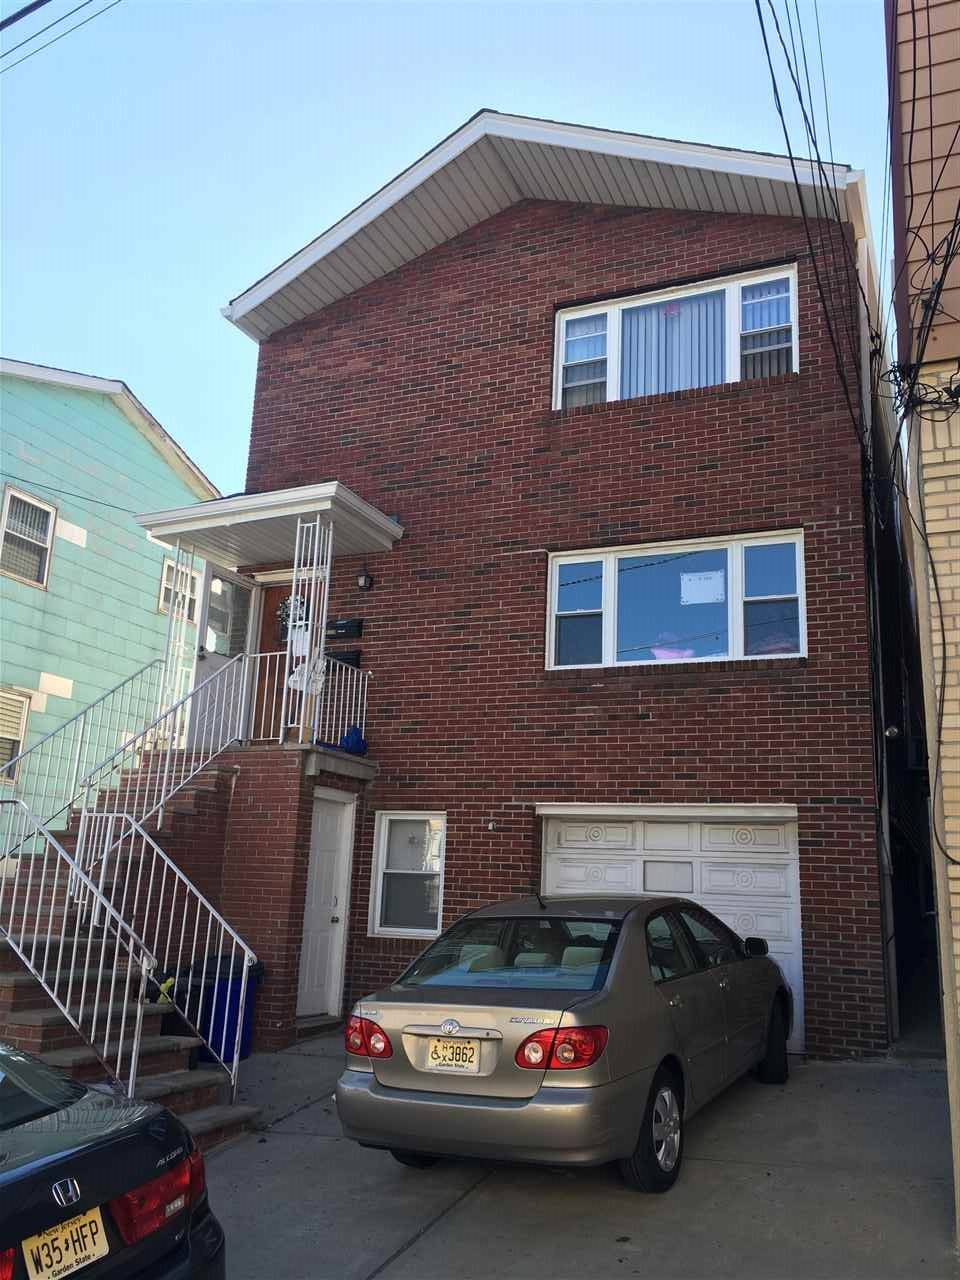 Three bedroom apartment located one block away from Bergenline avenue